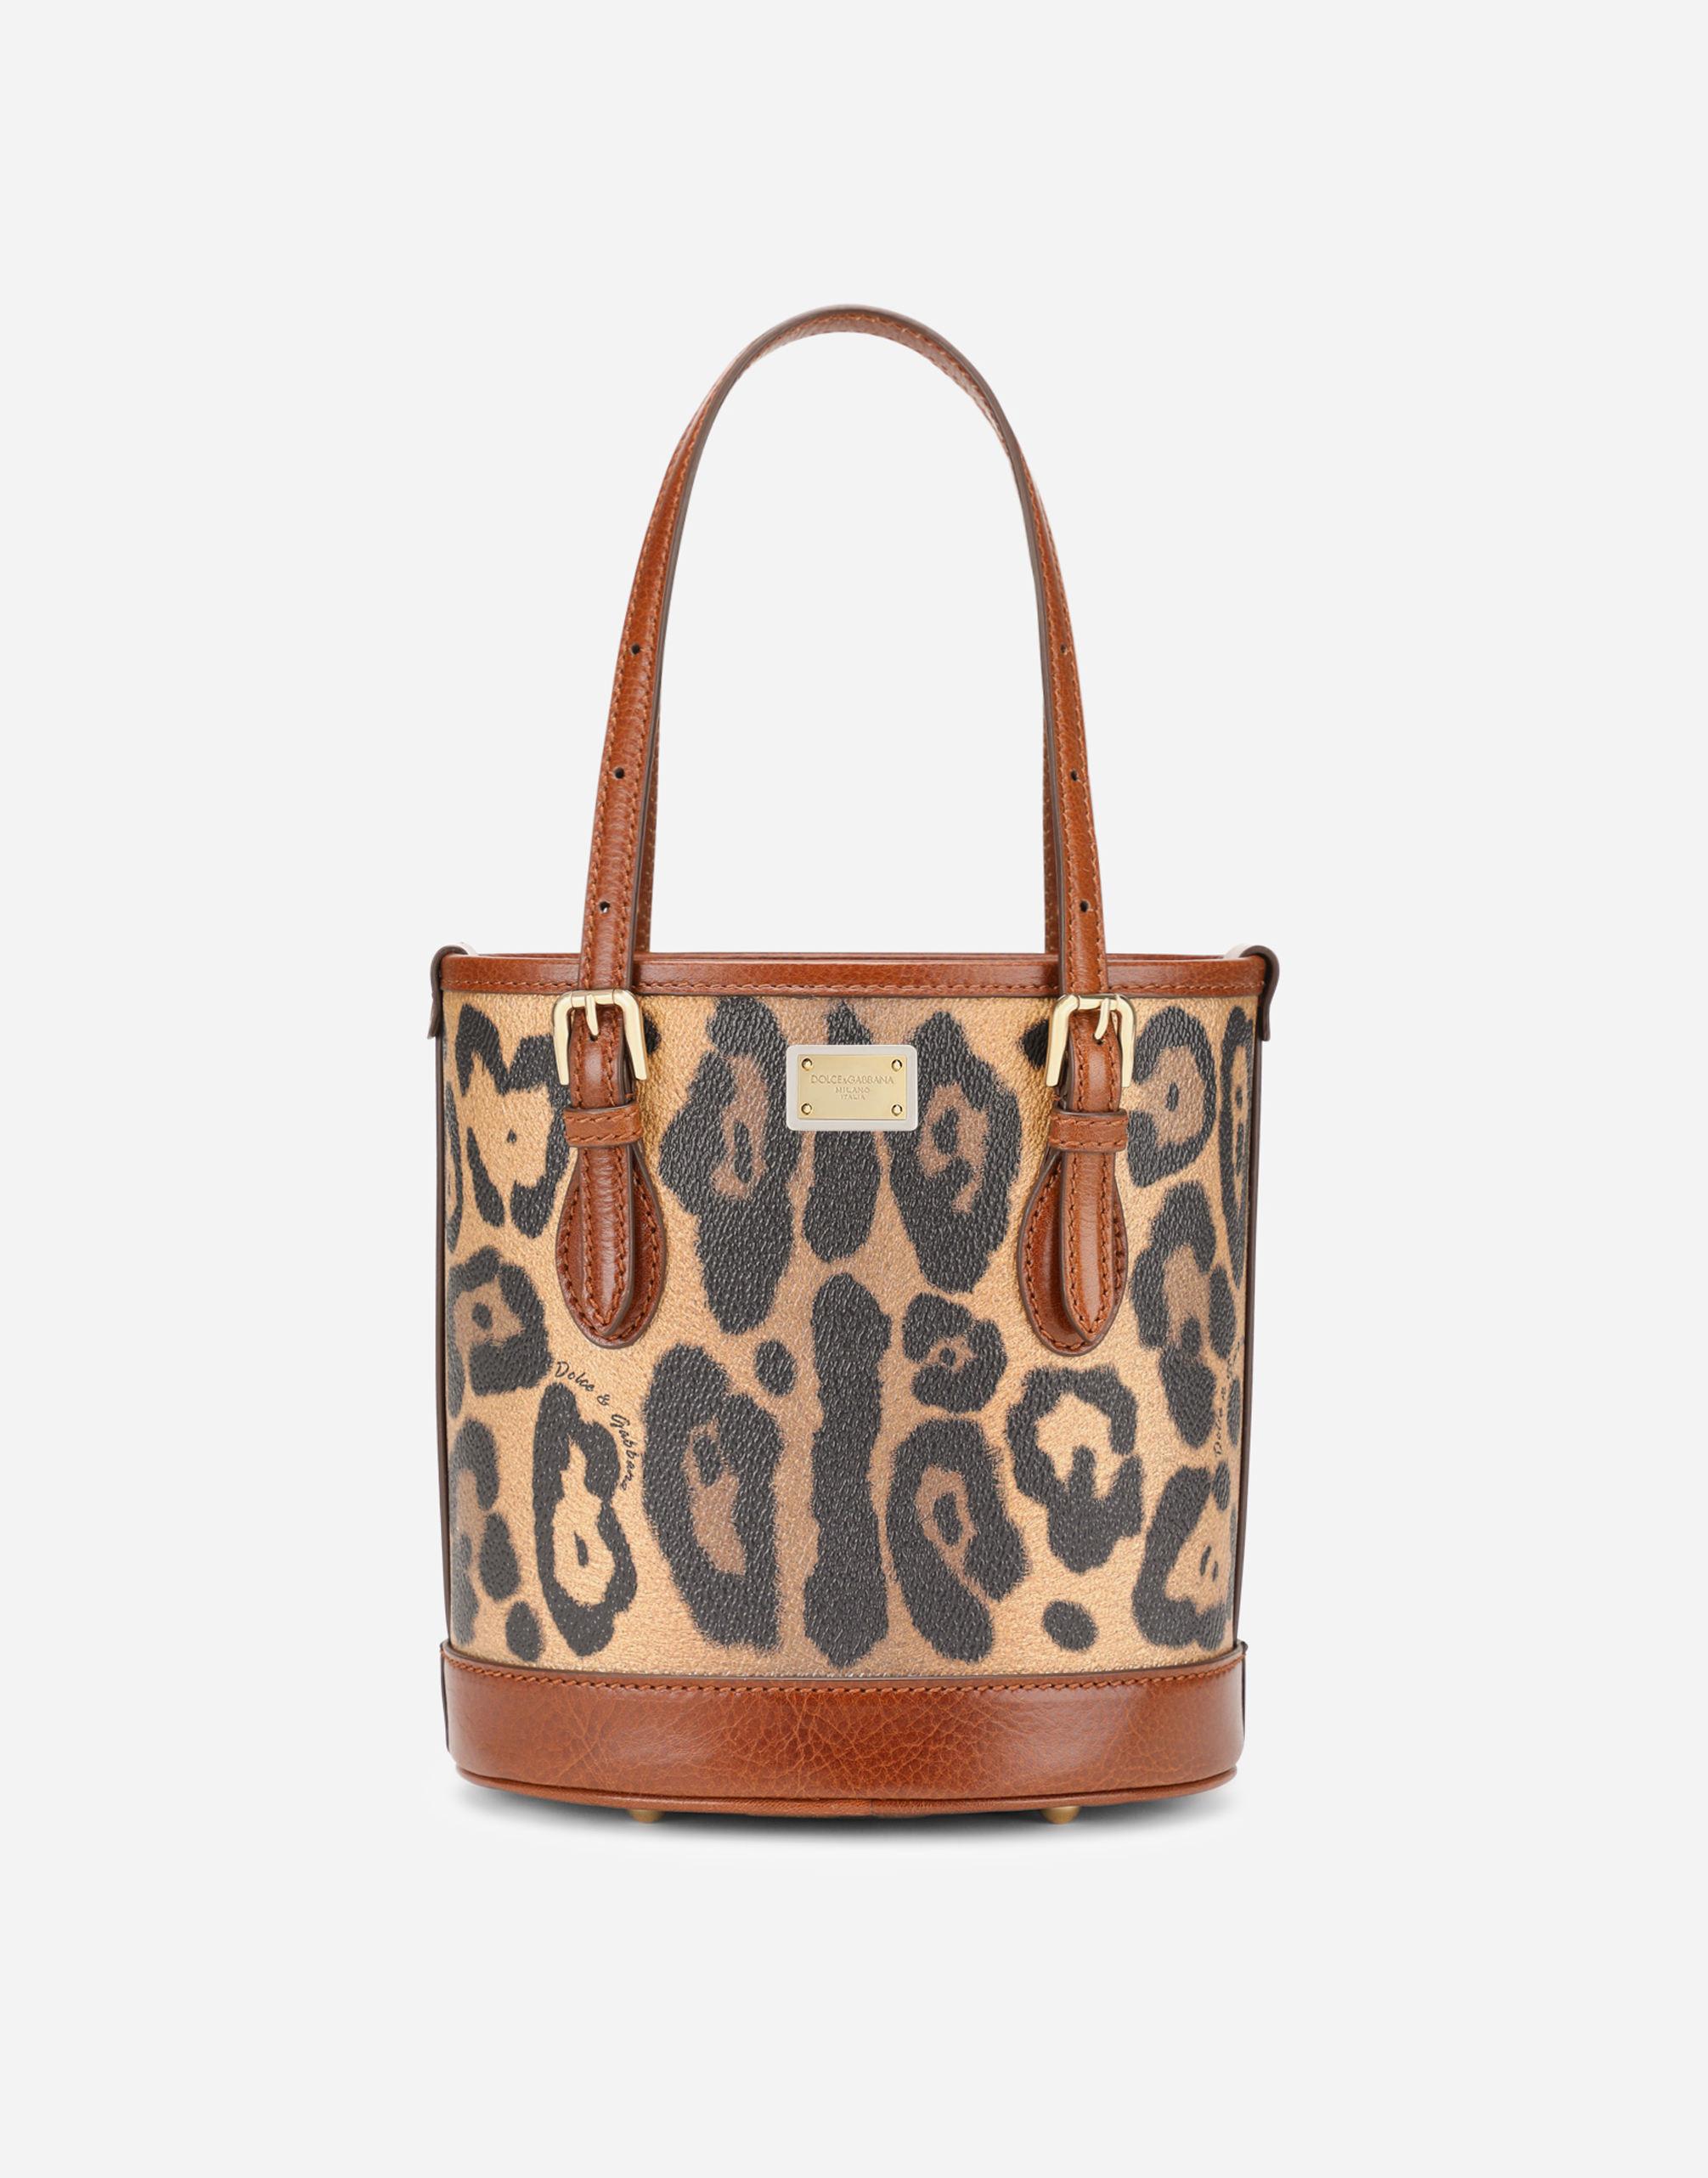 Small bucket bag in leopard-print Crespo with branded plate in Multicolor